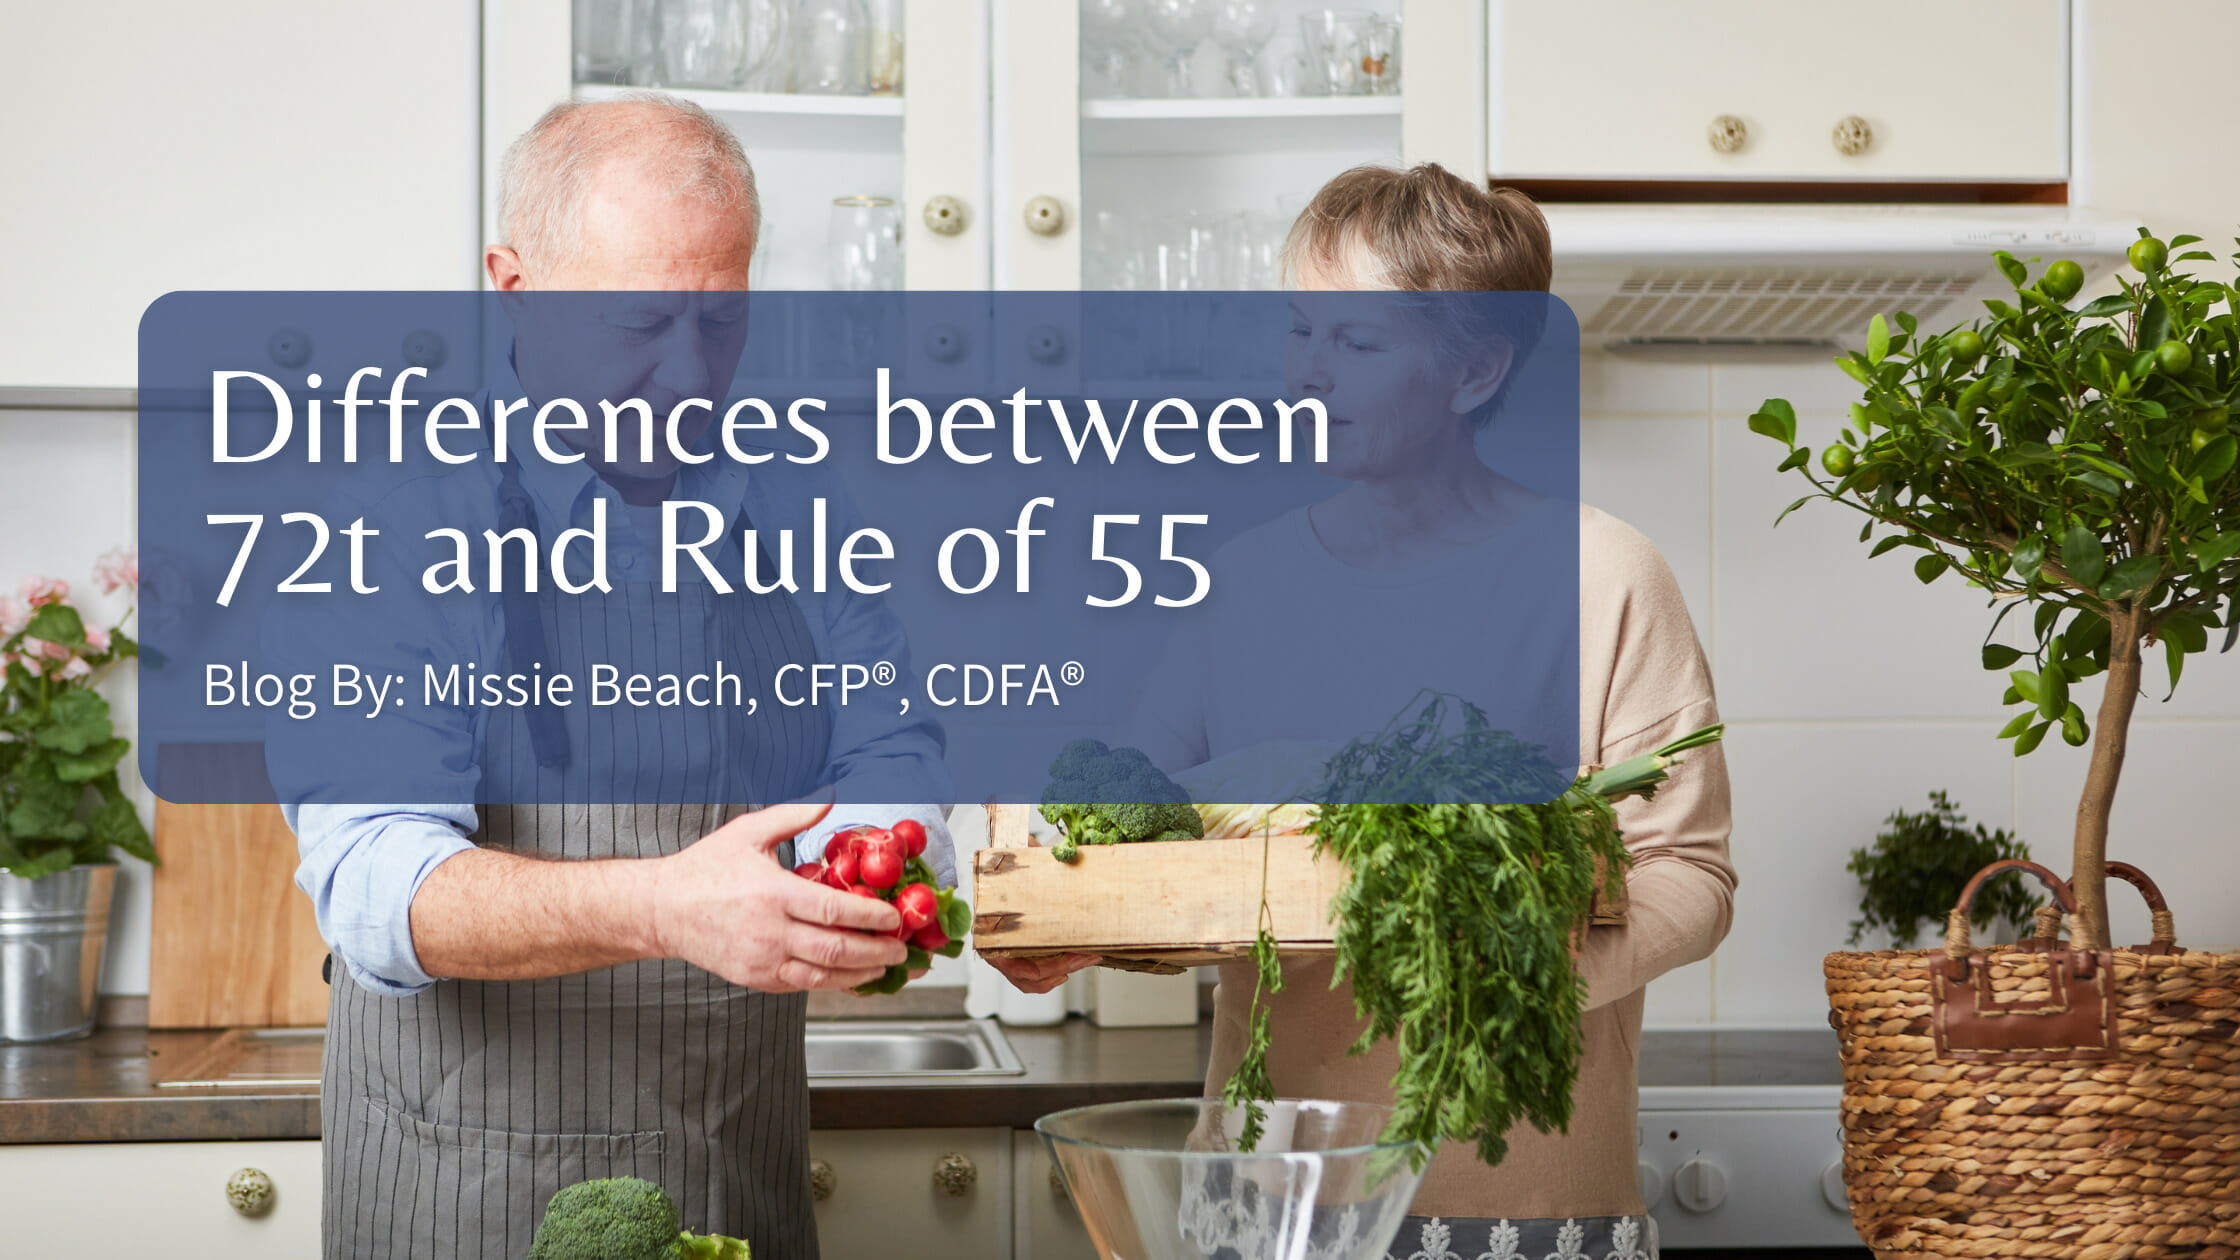 Differences Between 72t and Rule of 55